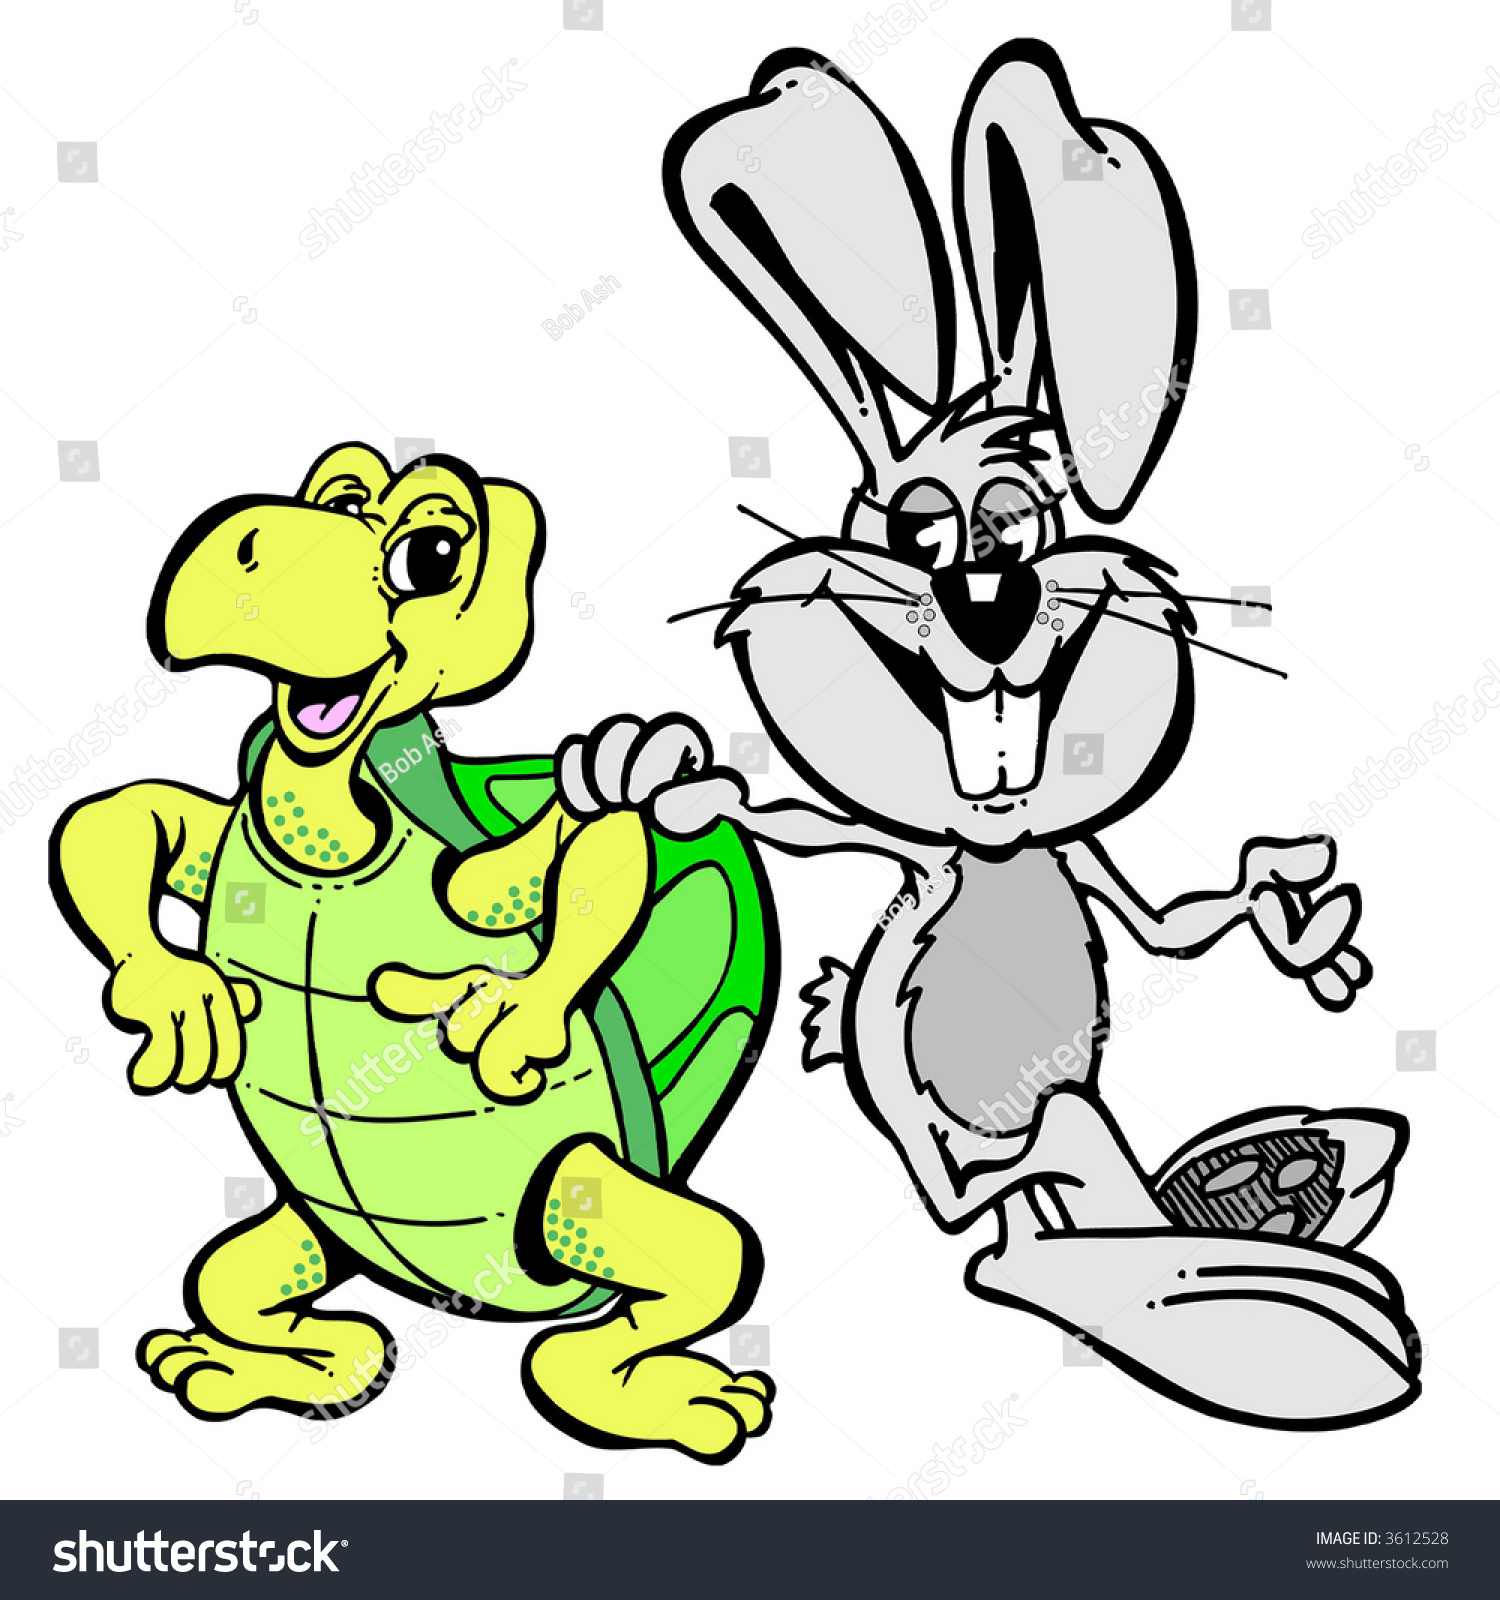 clip art tortoise and hare - photo #47